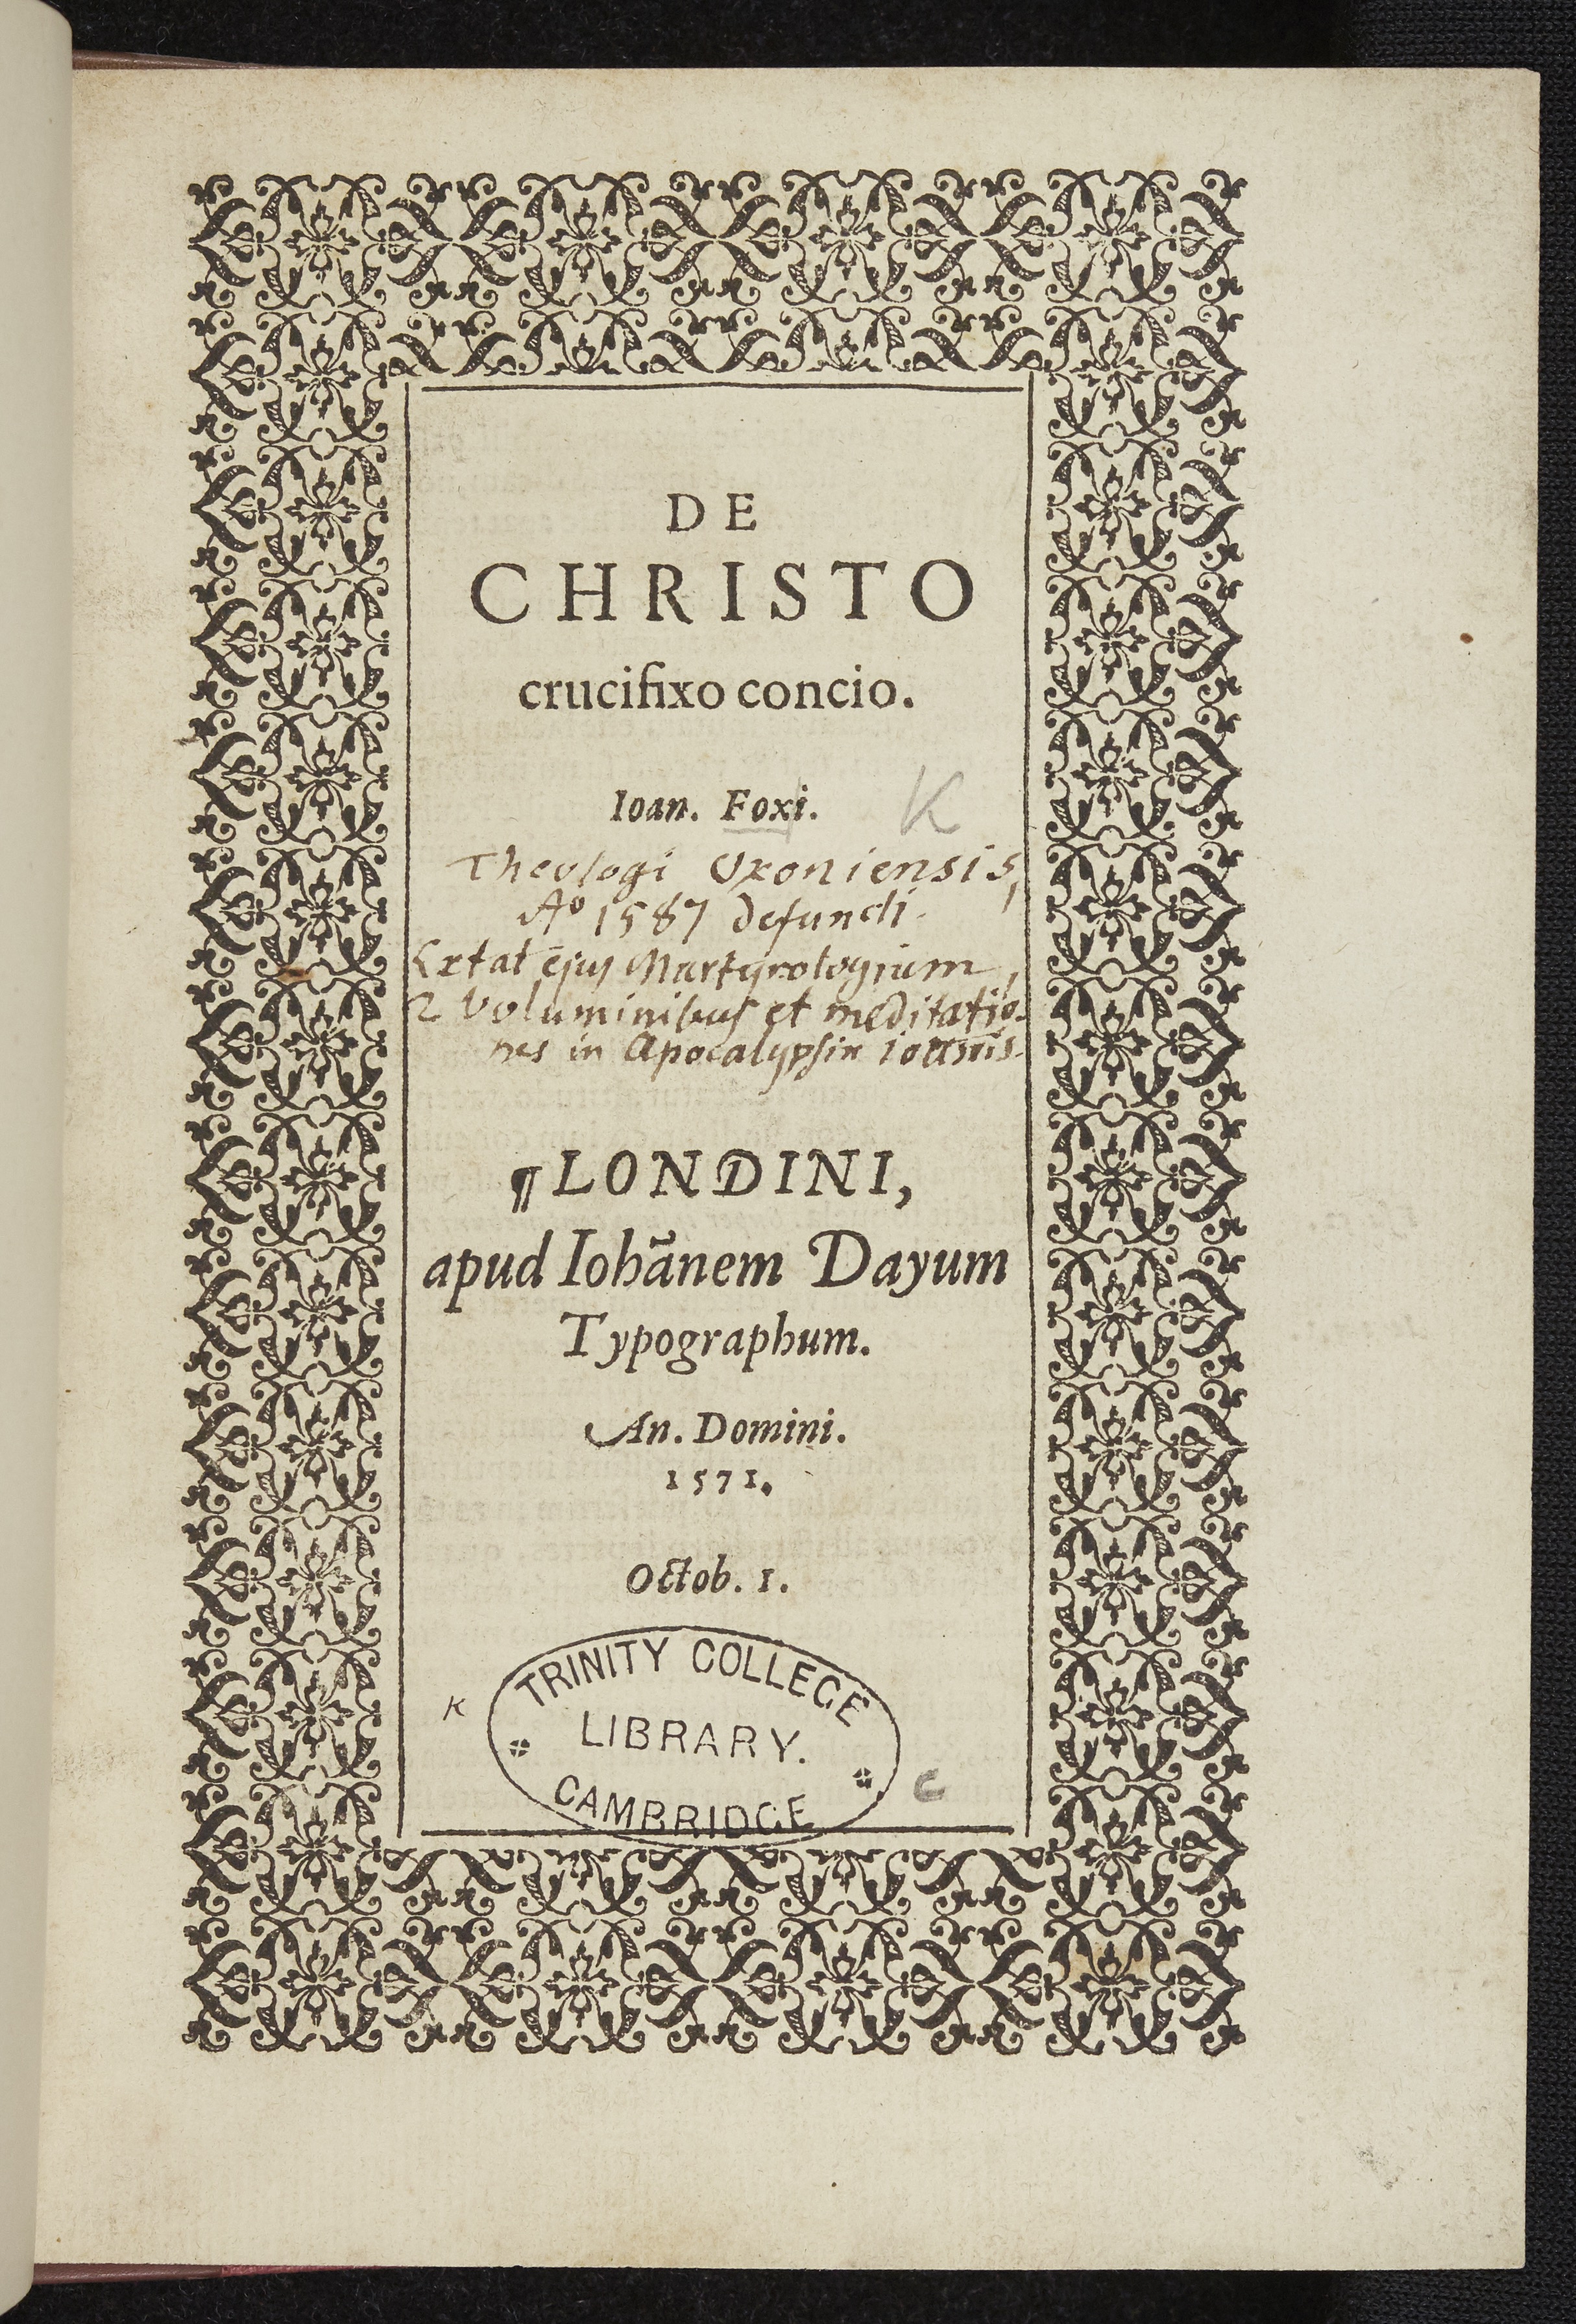 Foxe, Christ Crucified, Title Page